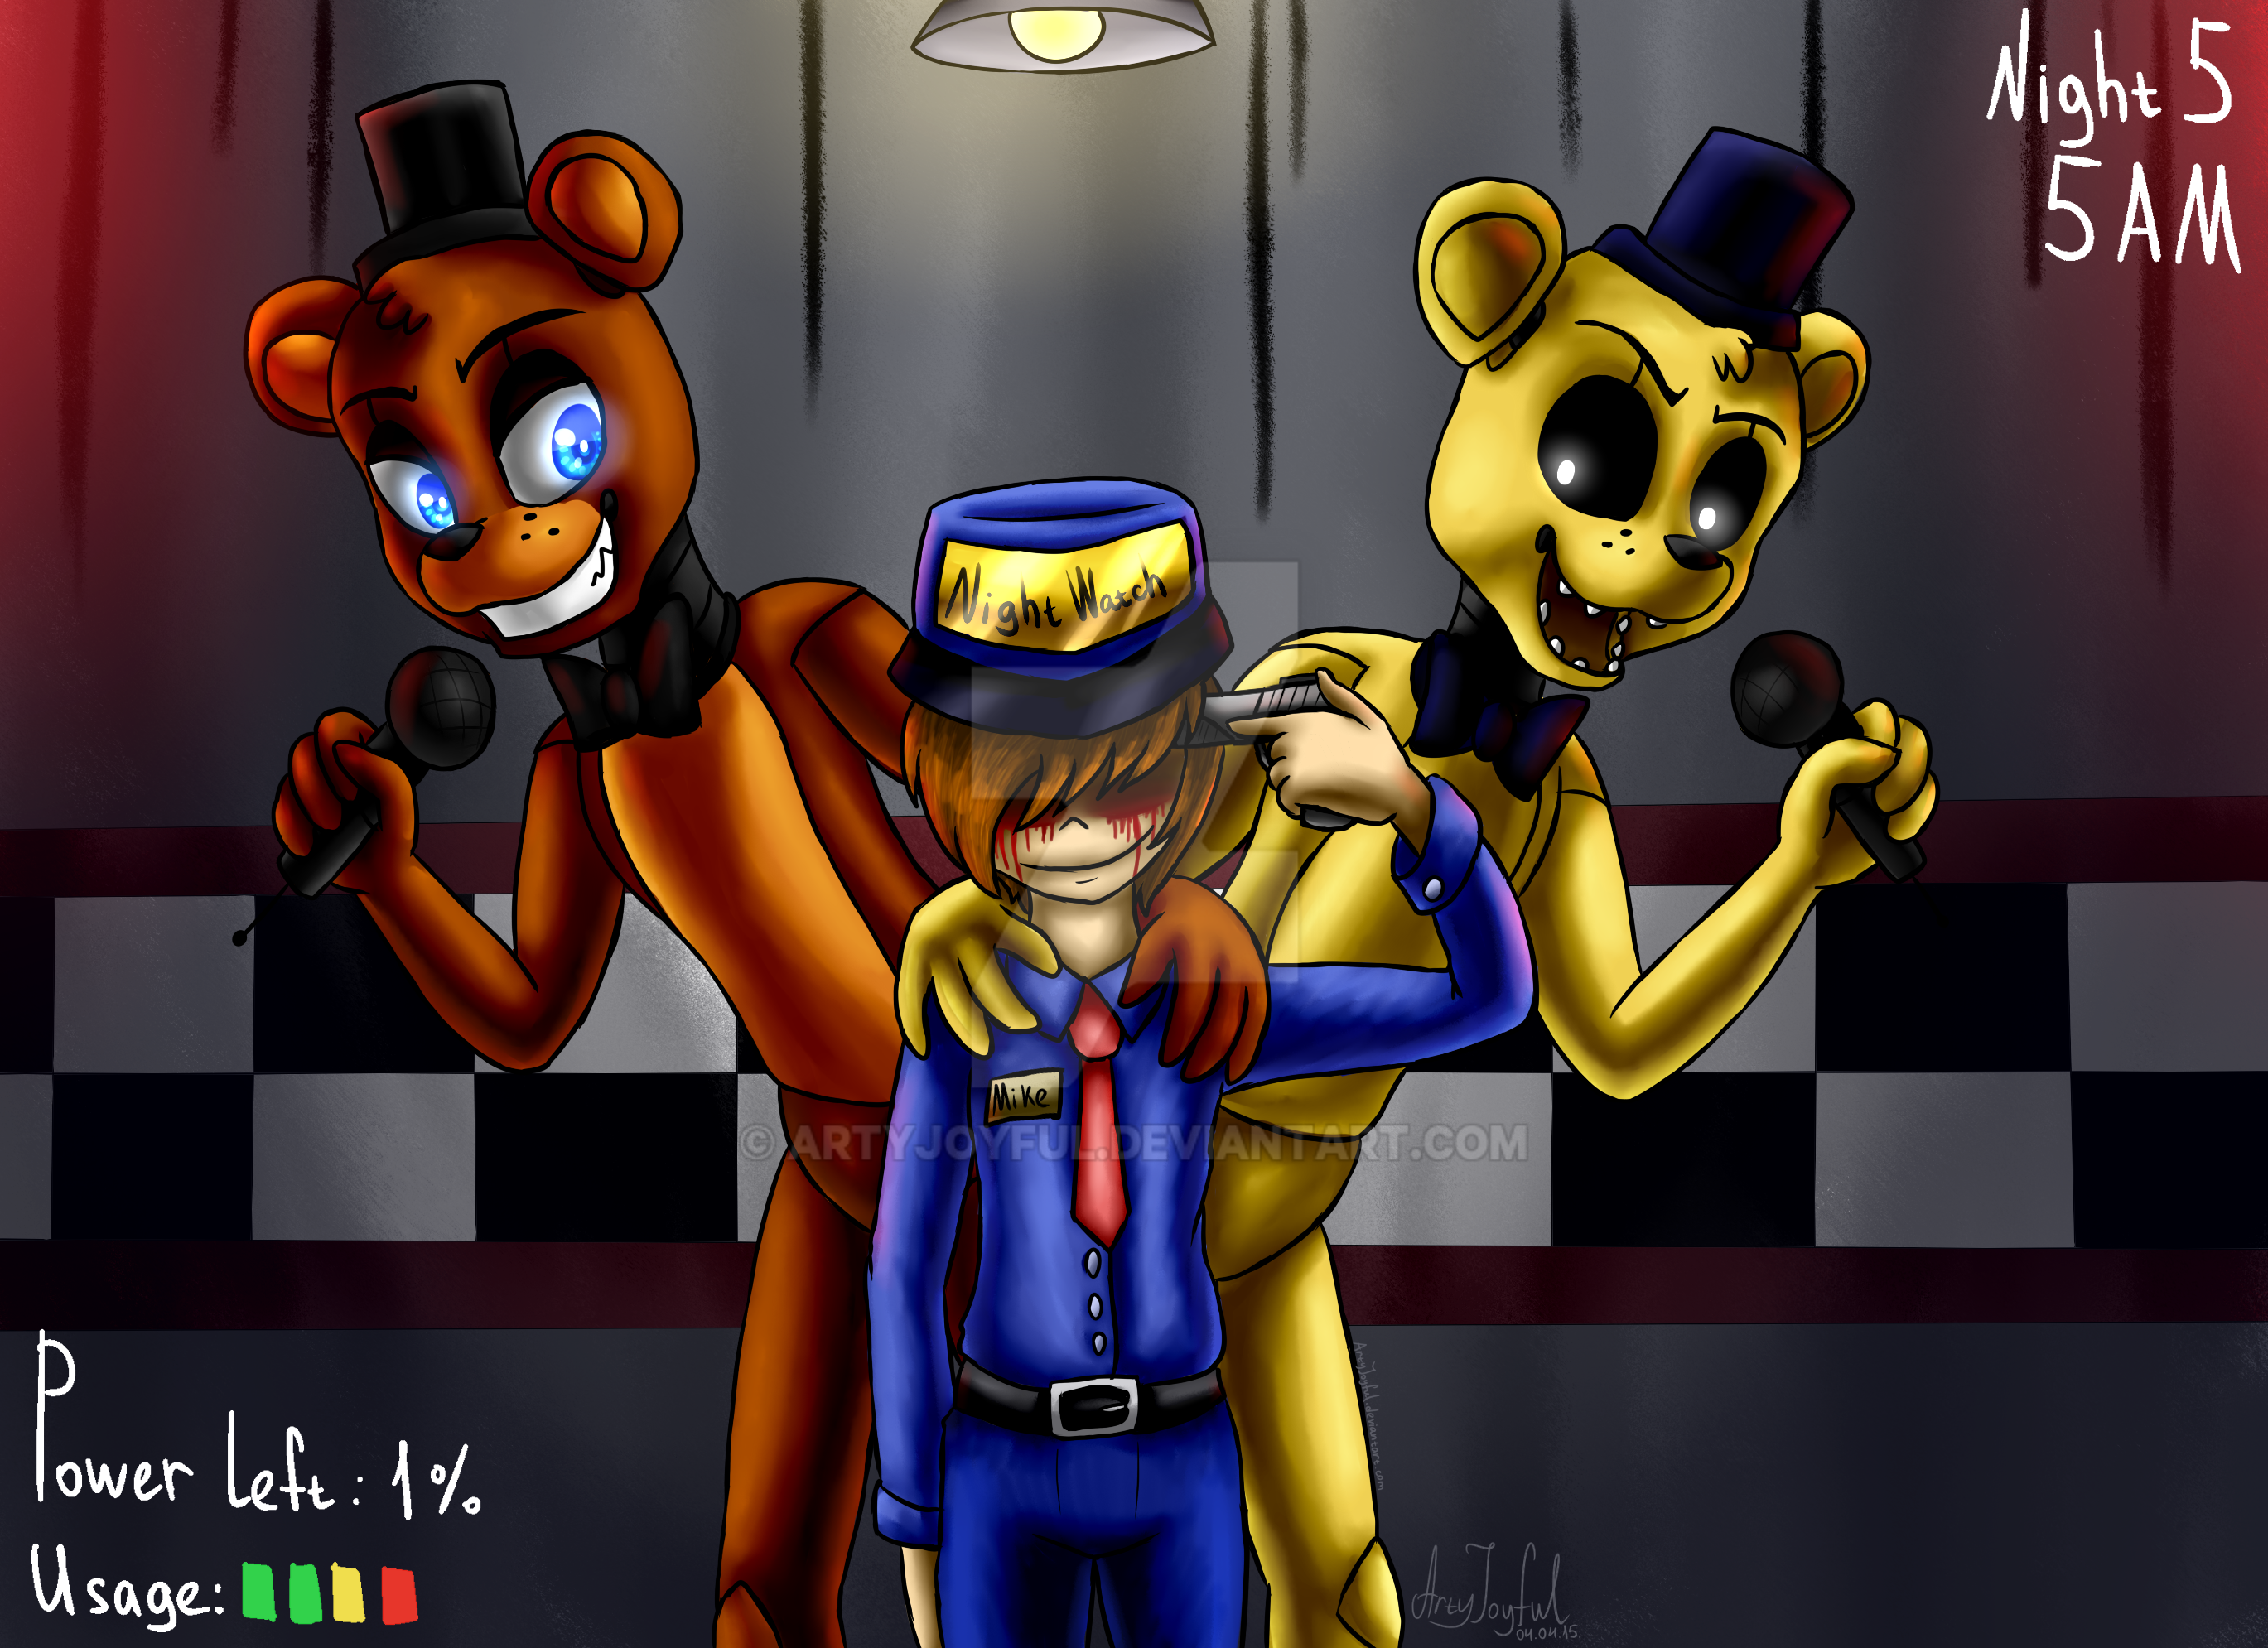 Game Over Five Nights At Freddy S By Artyjoyful On